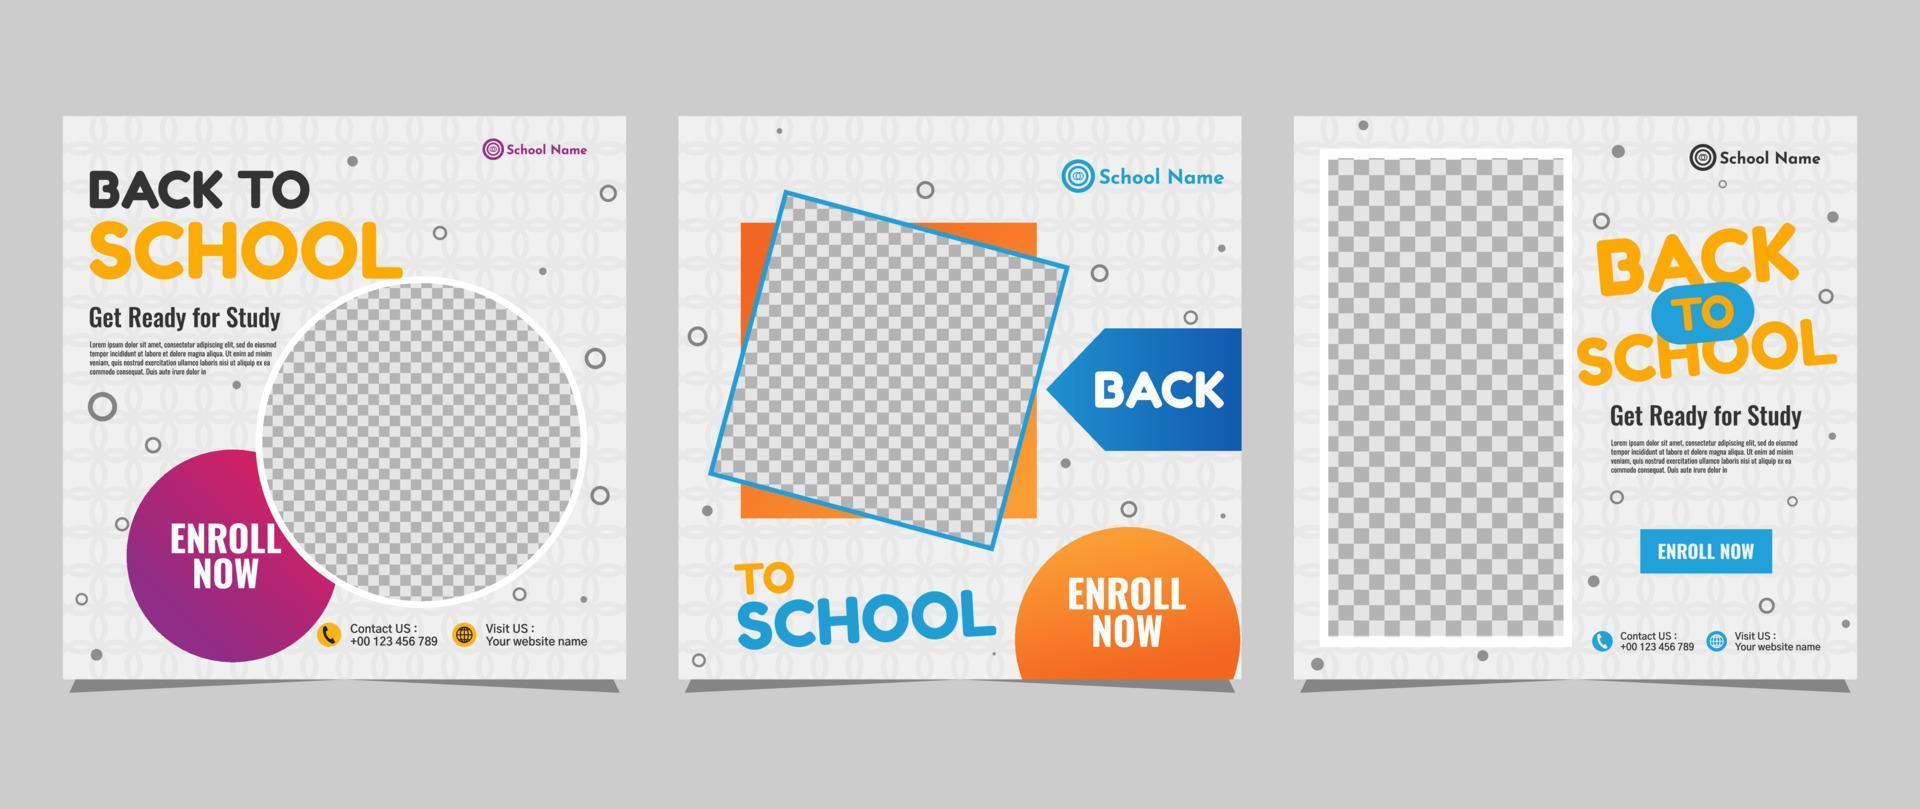 Back to school social media post template design. For web ads, postcard, card, business messages, discount flyers and big sale banners vector